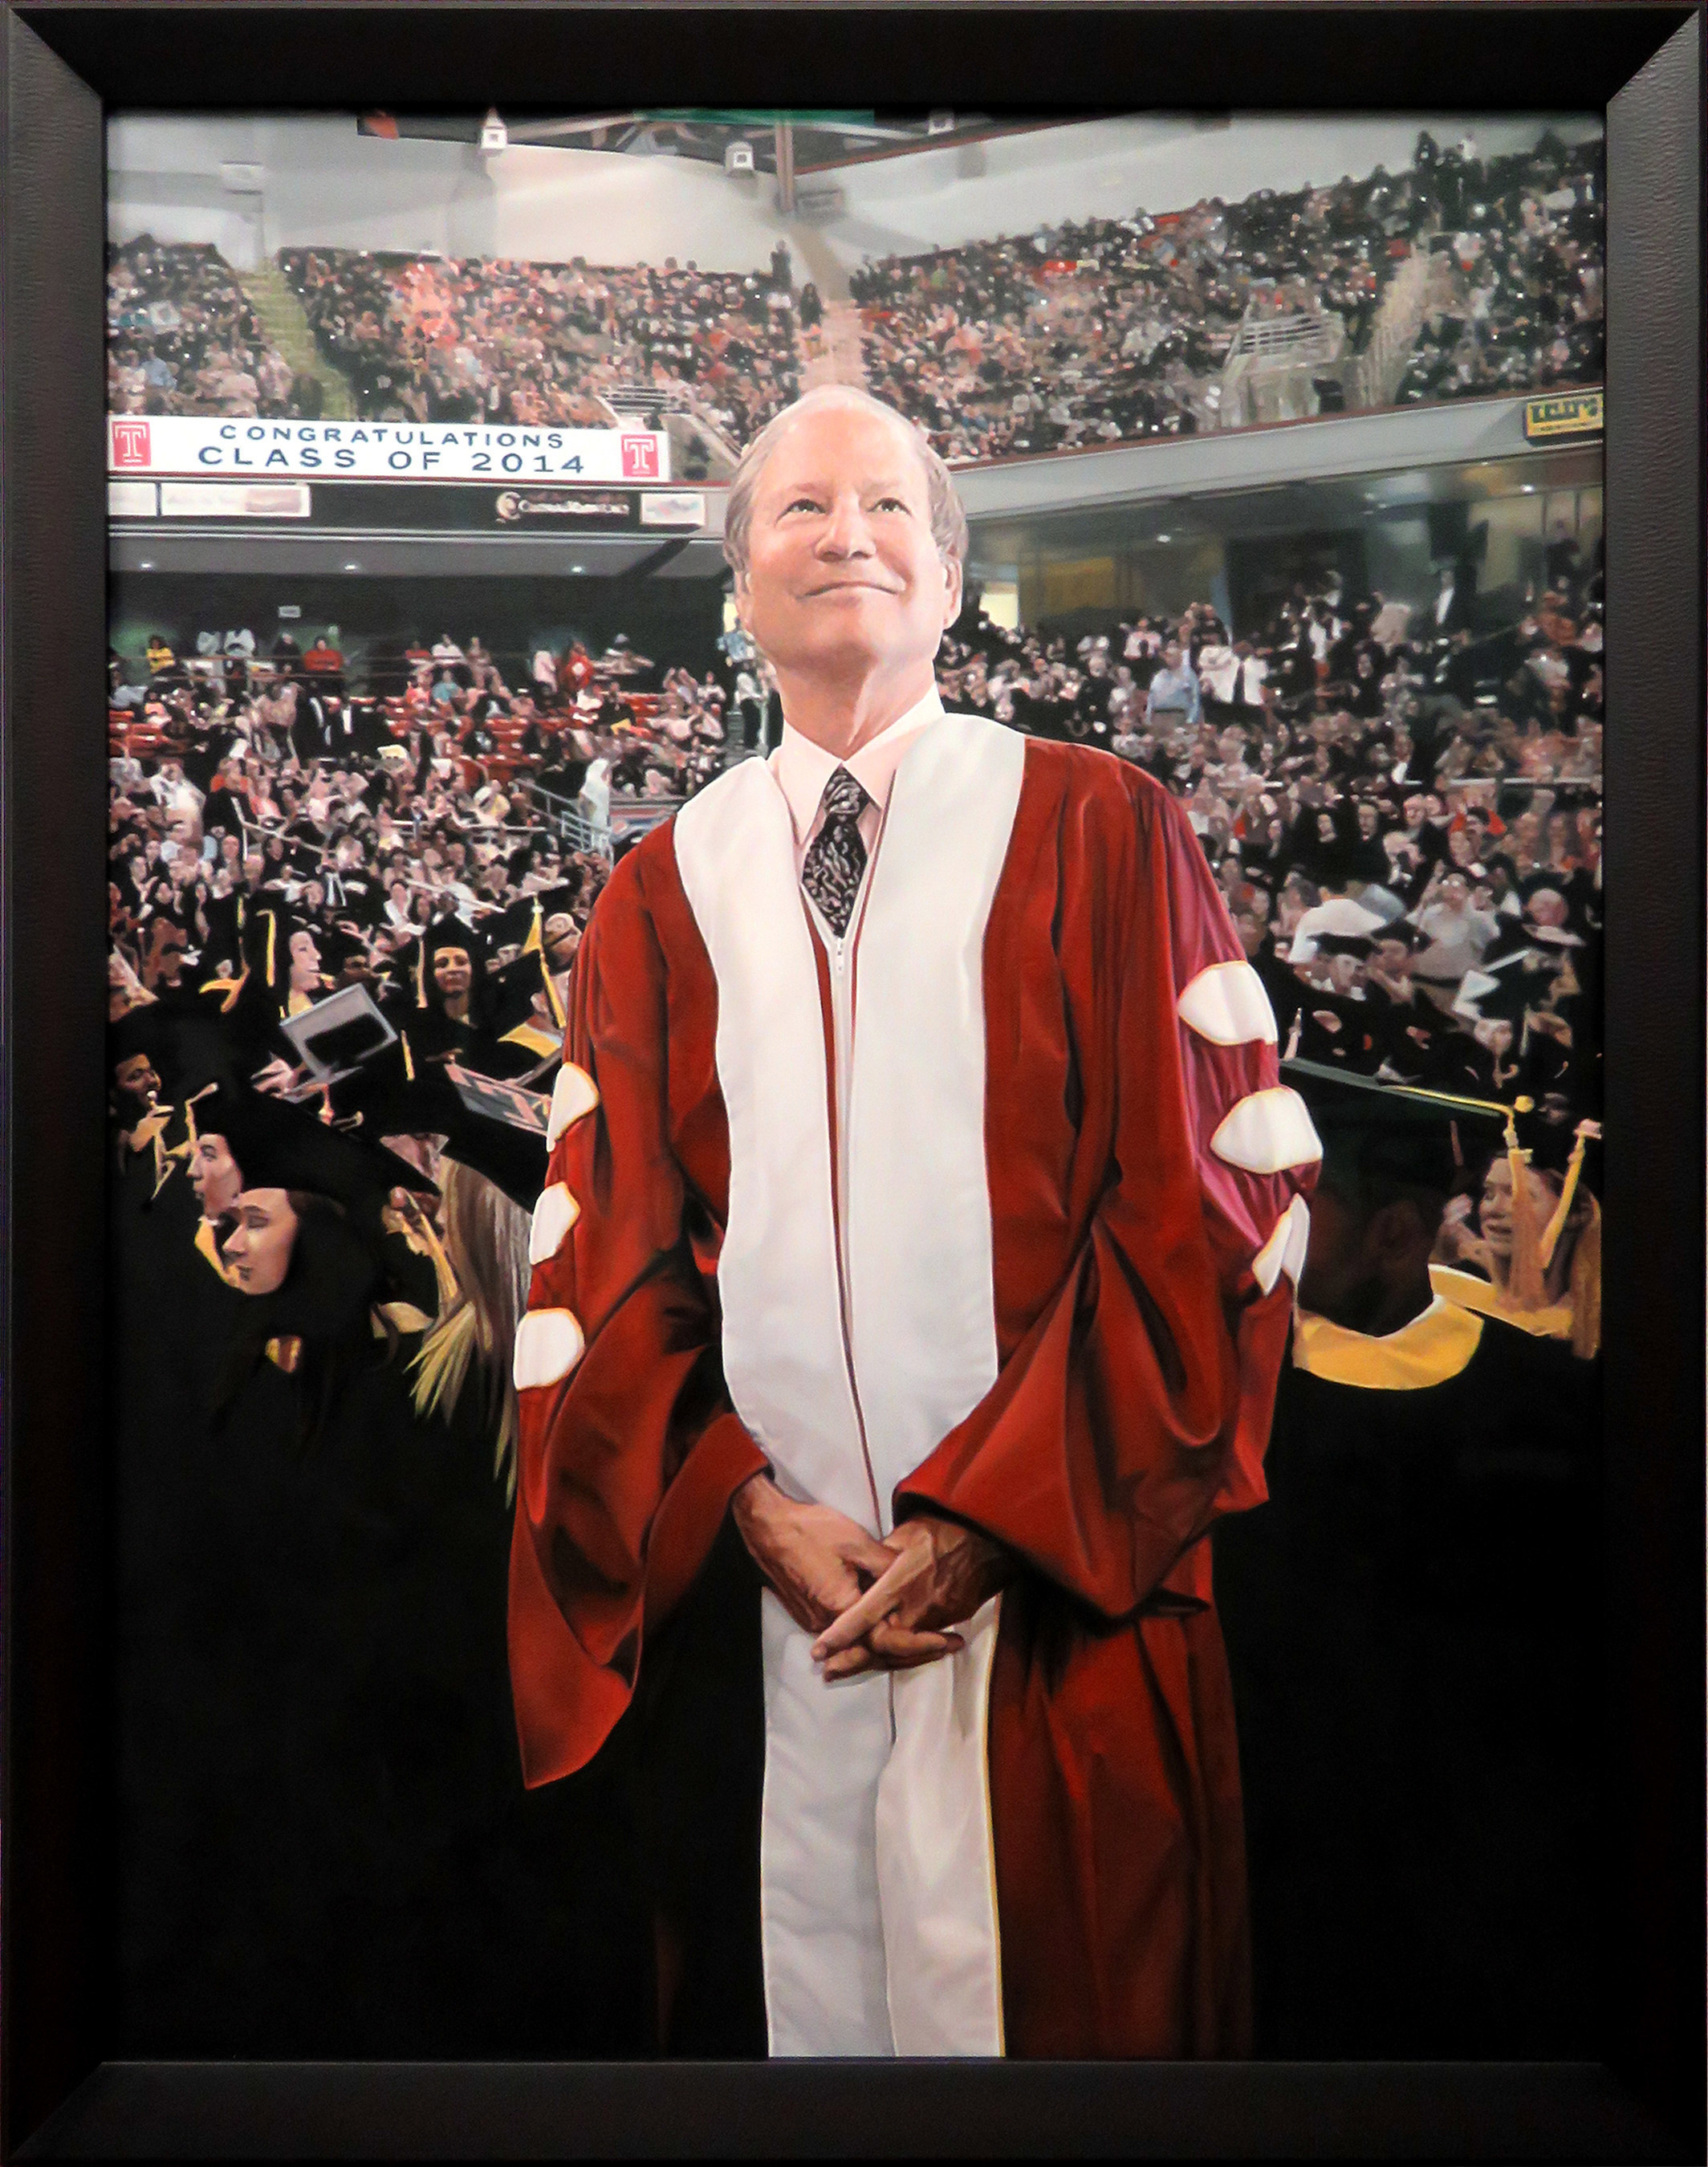 Portrait of Lewis Katz which was dedicated and will be displayed in the lobby of the Medical Education and Research Building at the Lewis Katz School of Medicine at Temple University. The portrait is by Italian artist, Francesco Mernini.